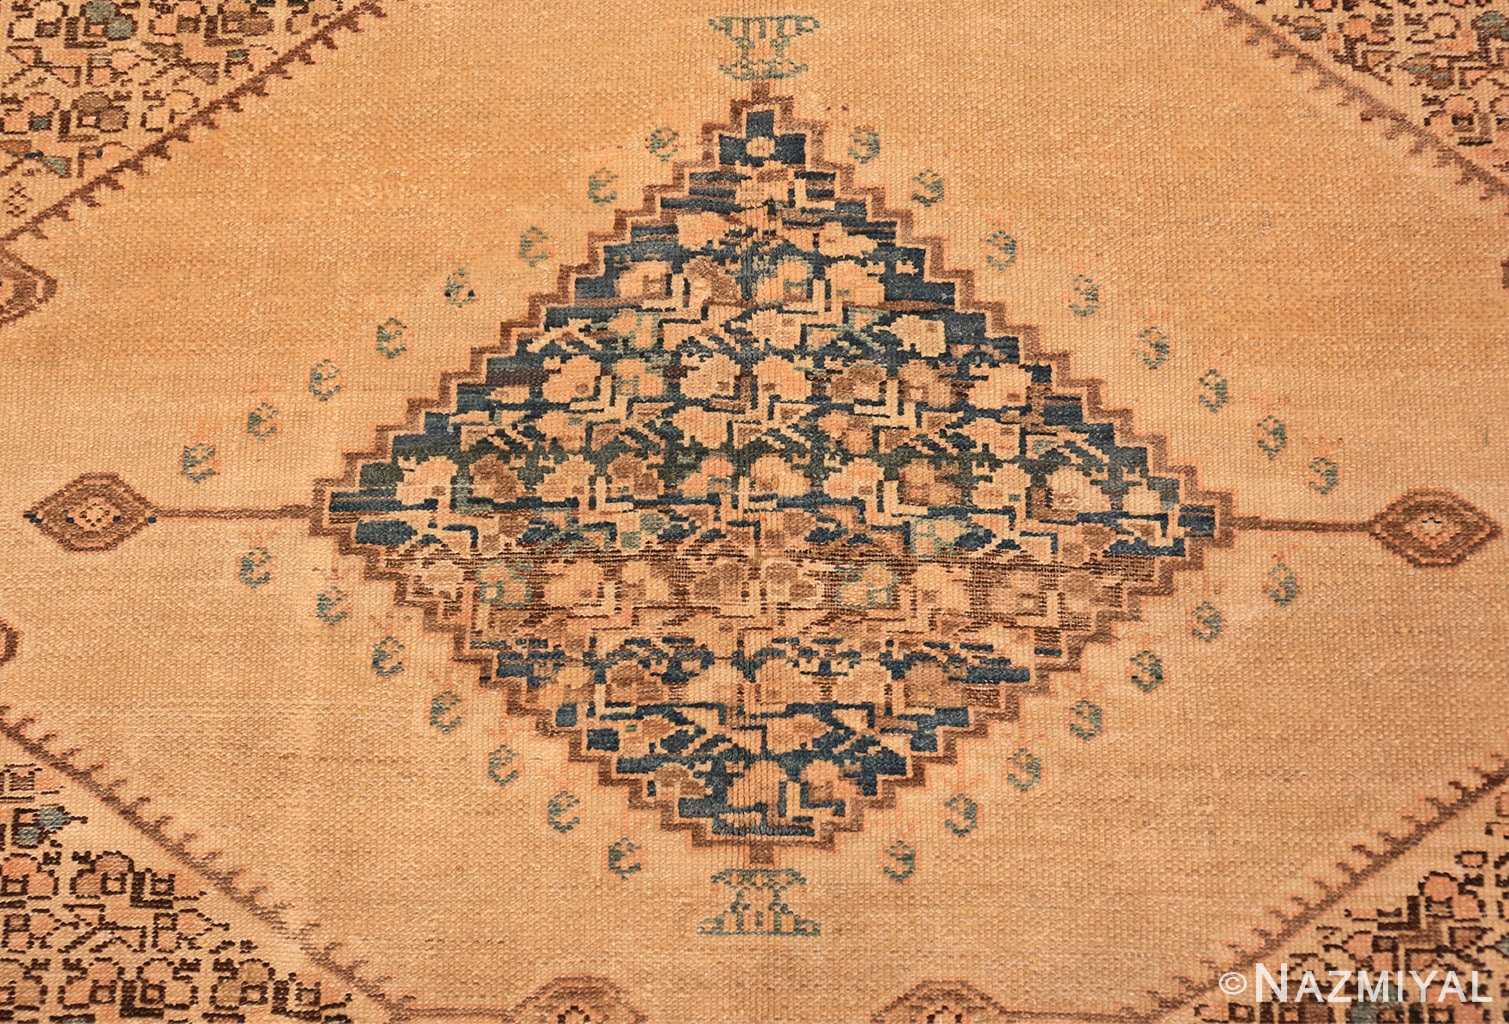 Field Antique Persian Malayer rug 42462 by Nazmiyal Antique Rugs in NYC